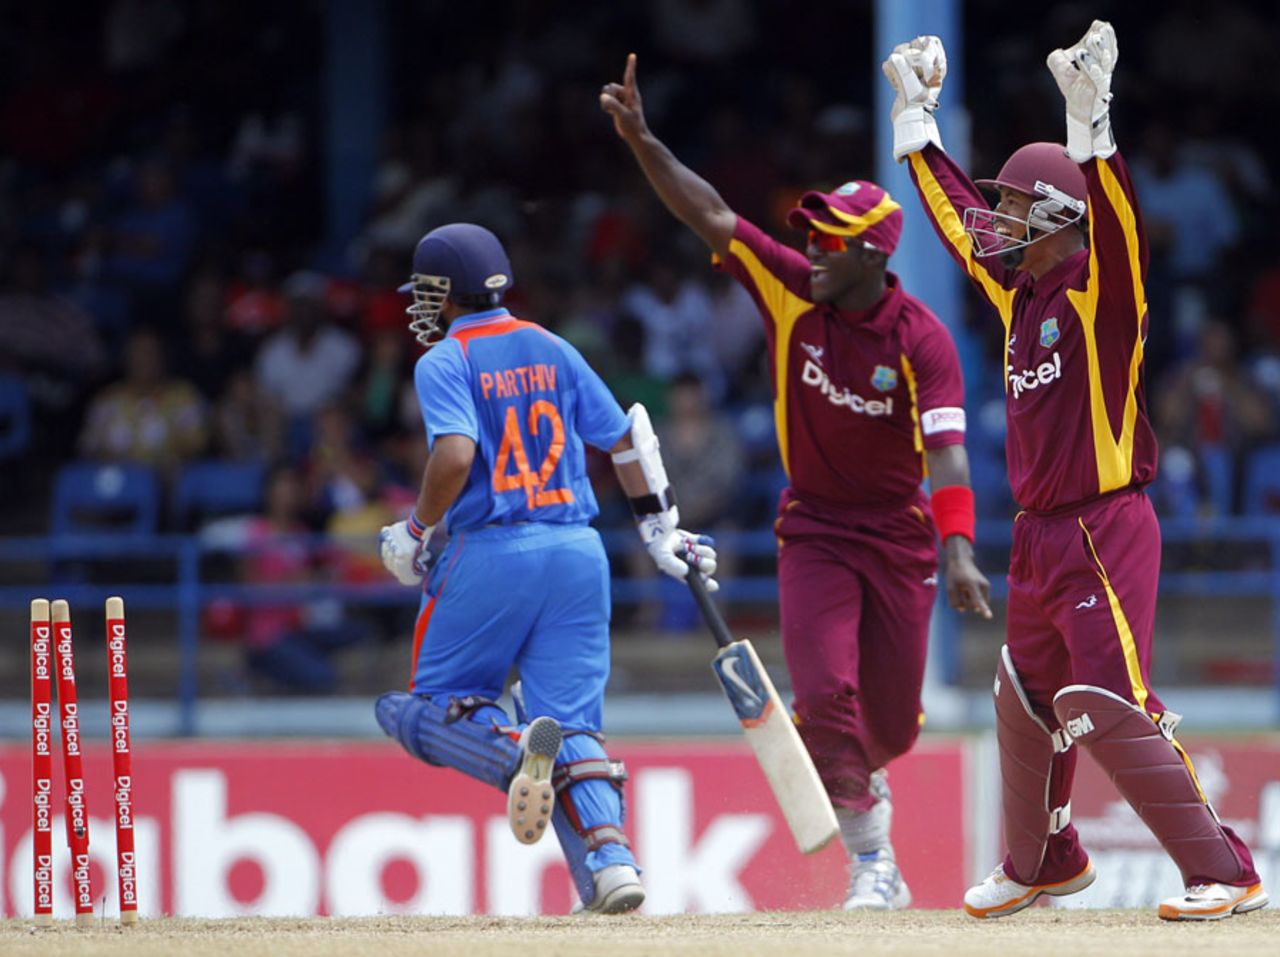 Darren Sammy and Carlton Baugh appeal successfully as Parthiv Patel is caught short, 1st ODI, Trinidad, June 6, 2011